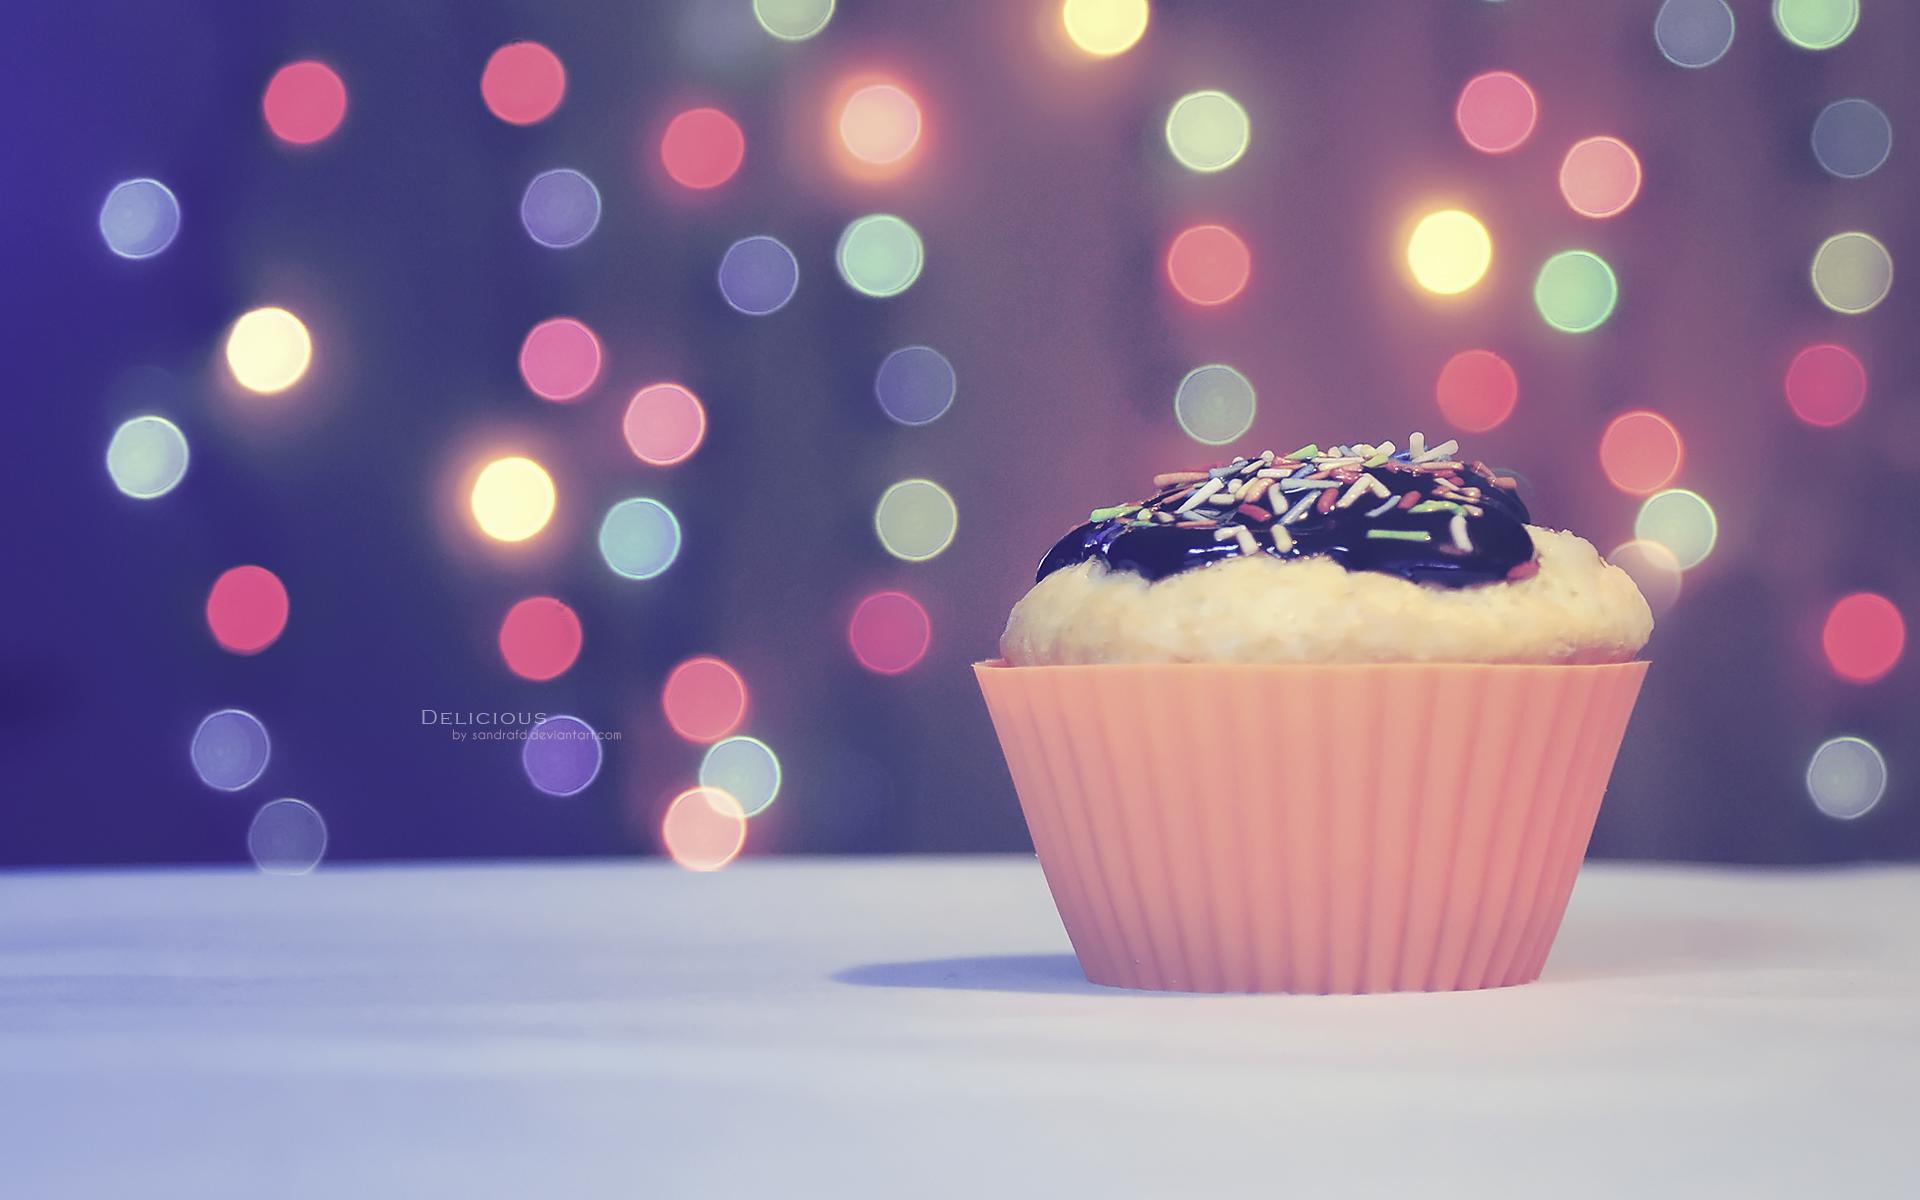 A cupcake with sprinkles on a table with a colorful background. - Cake, cupcakes